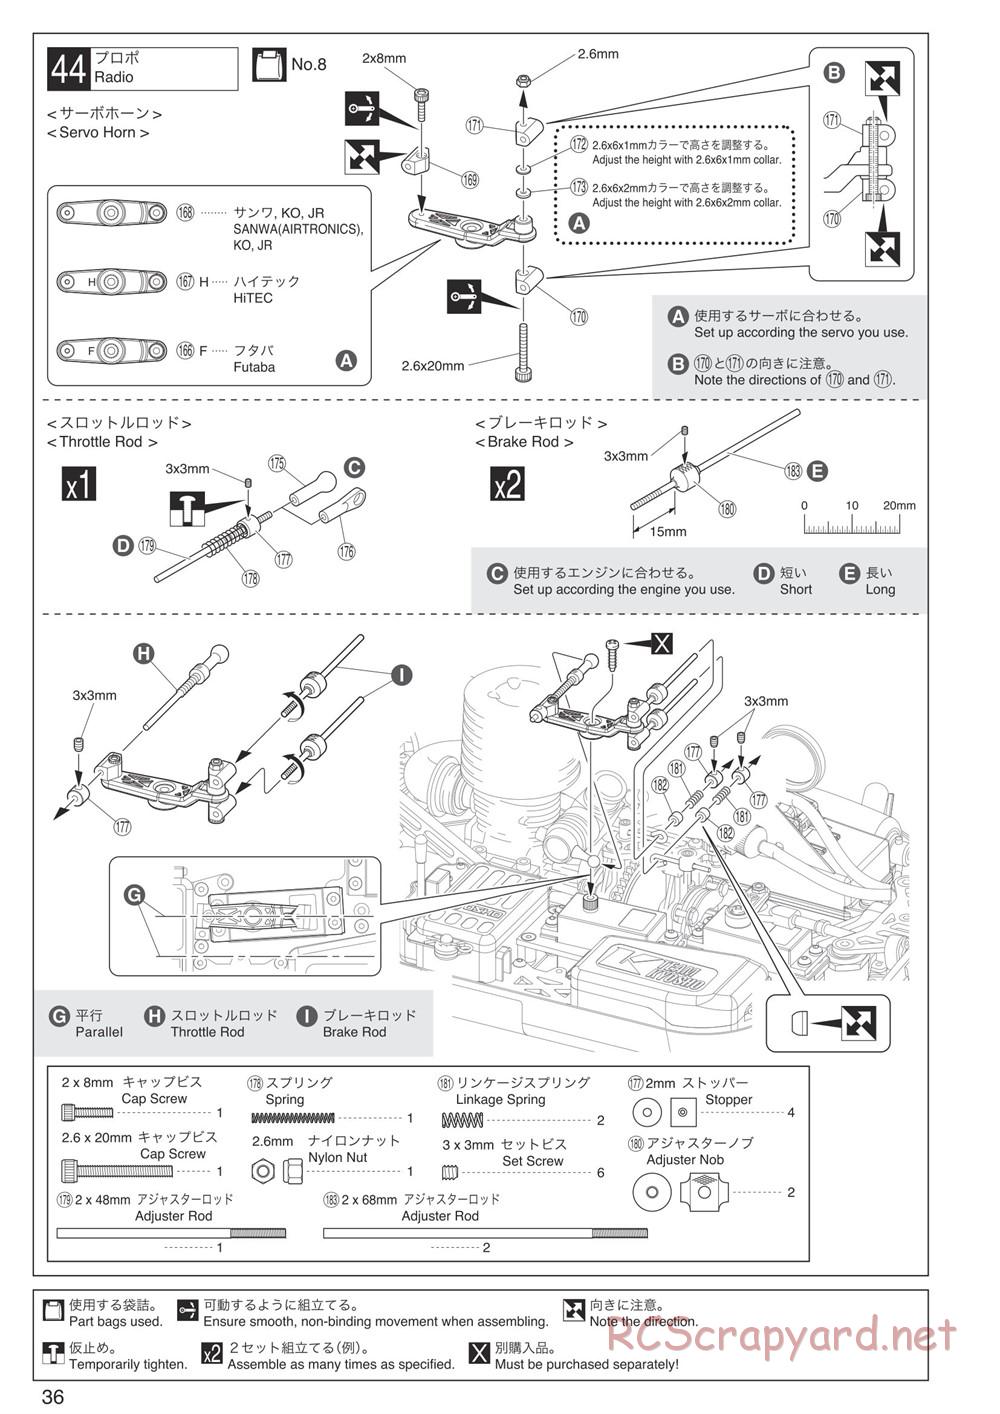 Kyosho - Inferno MP9 TKI4 10th Anniversary Special Edition - Manual - Page 36